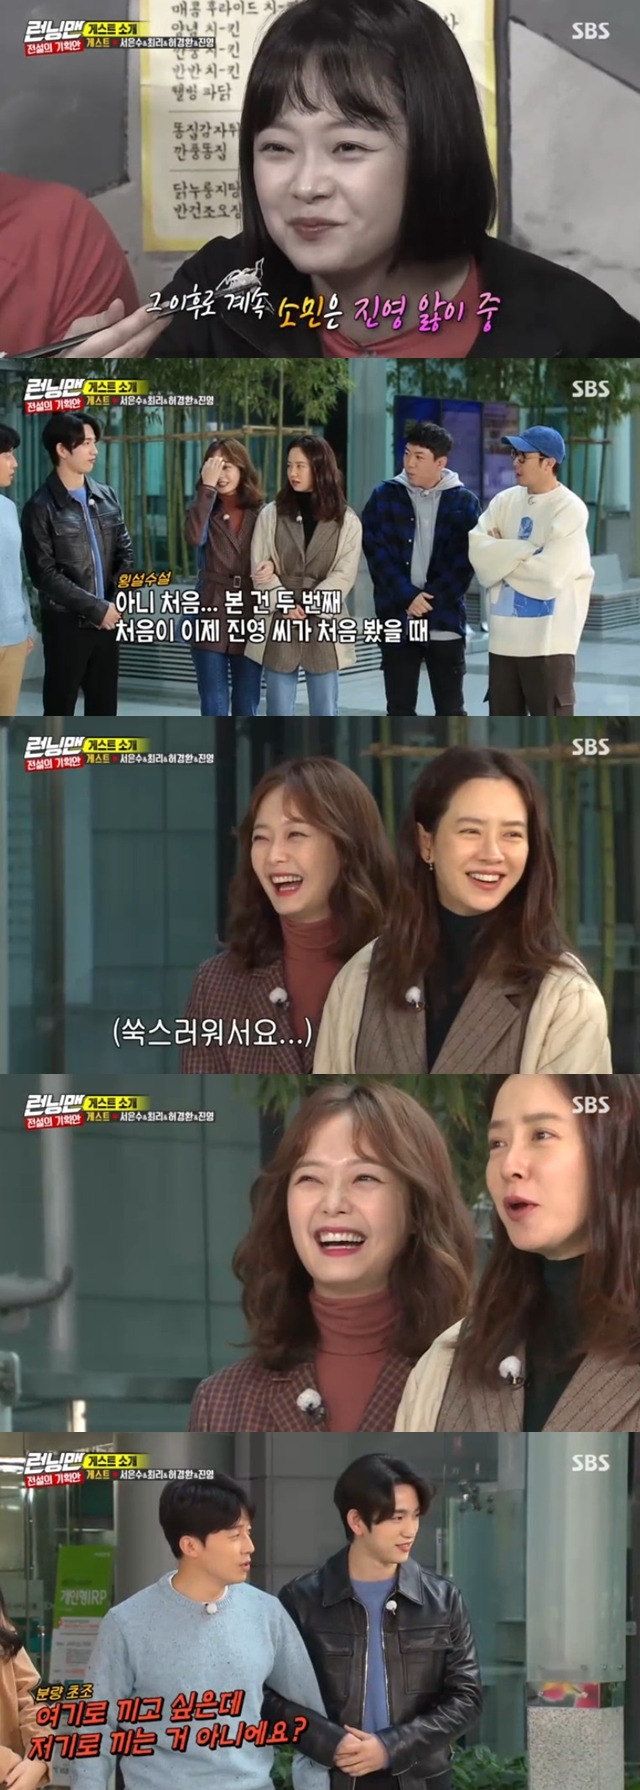 Actor Jeon So-min became a adolescent girl in the surprise appearance of GOT7 Jinyoung.On SBS Running Man broadcast on November 17, Seo Eun-soo Choi Heo Kyung-hwan Jinyoung appeared as a guest.The guest featured actor Seo Eun-soo and Choi Lee, cheering the male cast; the disappointment of the female cast member Song Ji-hyo Jeon So-min also briefly.Another guest, actor Heo Kyung-hwan and GOT7 Jinyoung appeared, and the quintile was reversed.In particular, Jeon So-min, who showed off his affection for Jinyoung in the past, could not hide his embarrassment as soon as he saw Jinyoung.Jeon So-min was shy like a teenage girl and hid behind Song Ji-hyo.Jeon So-min admired Song Ji-hyo as handsome and suddenly put Song Ji-hyos arms in his arms and focused attention.bak-beauty